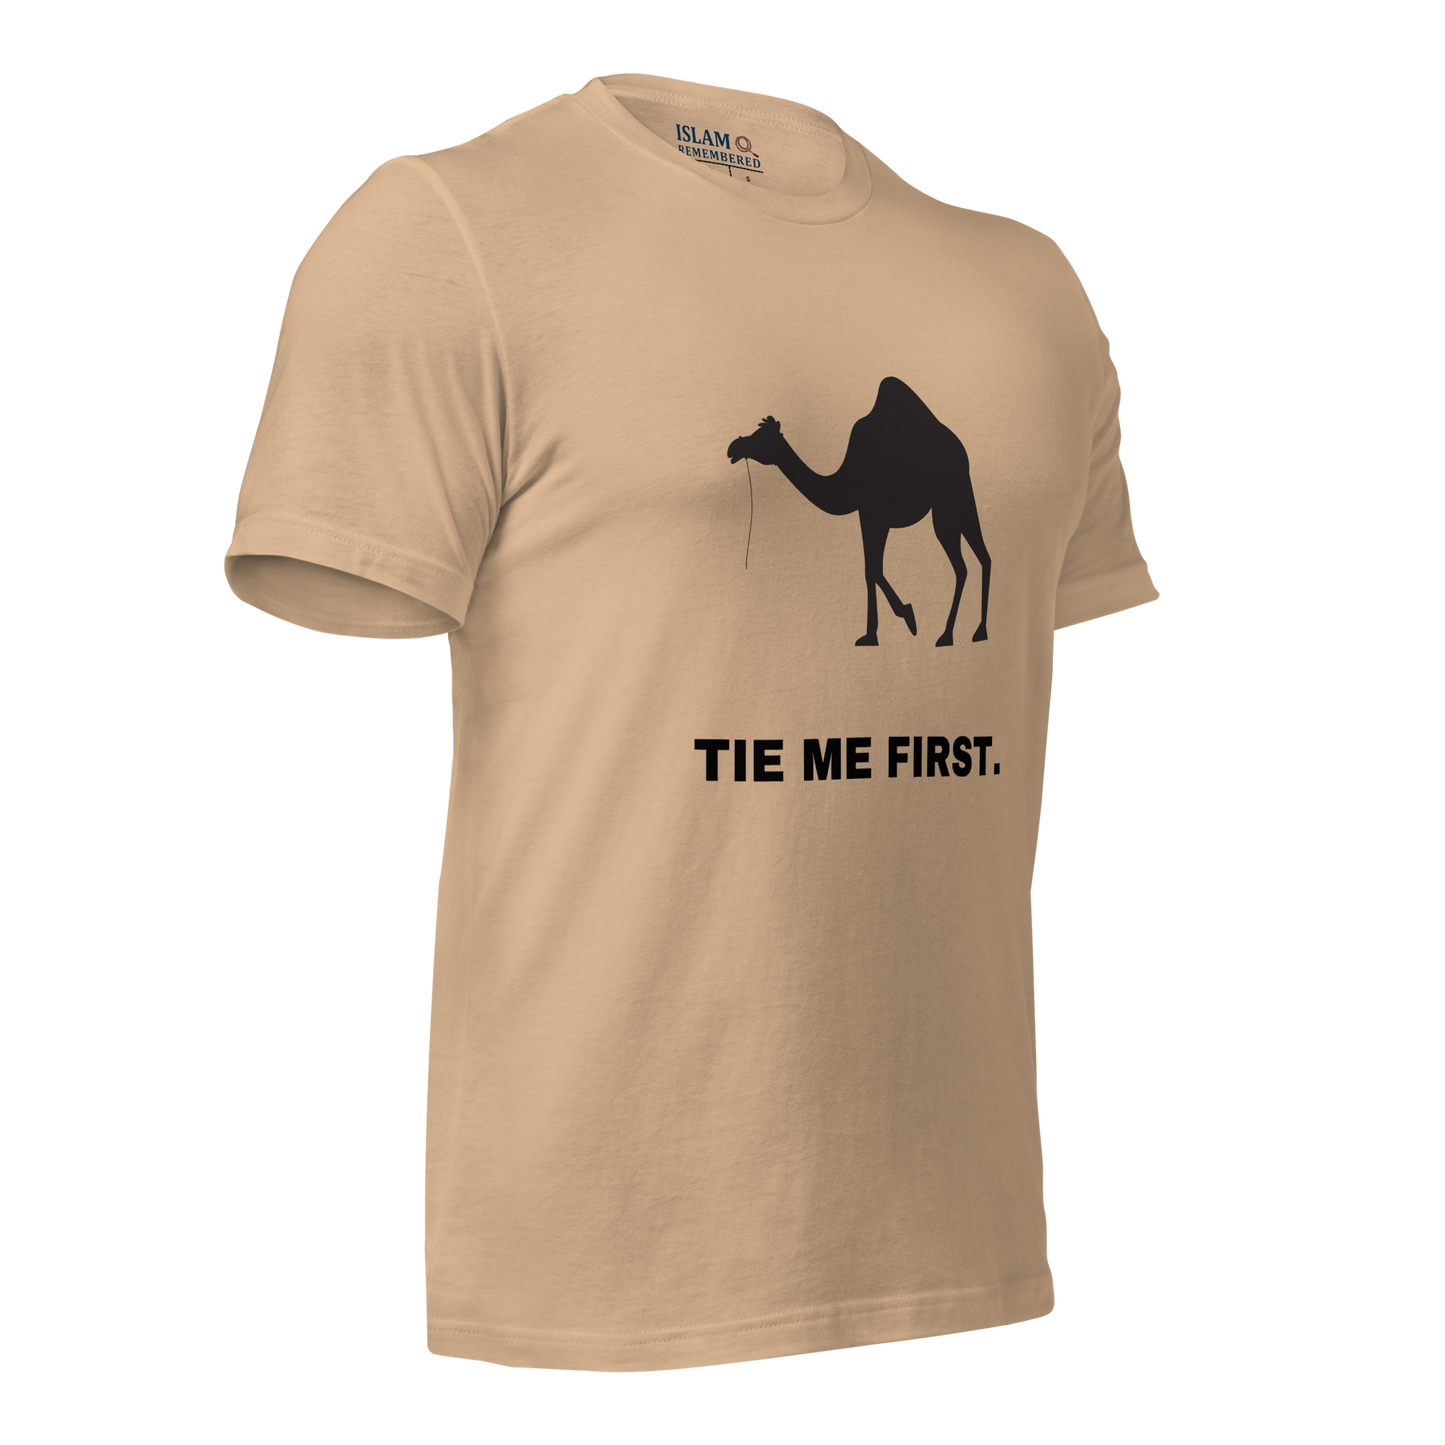 ADULT T-Shirt - TIE ME FIRST - Black